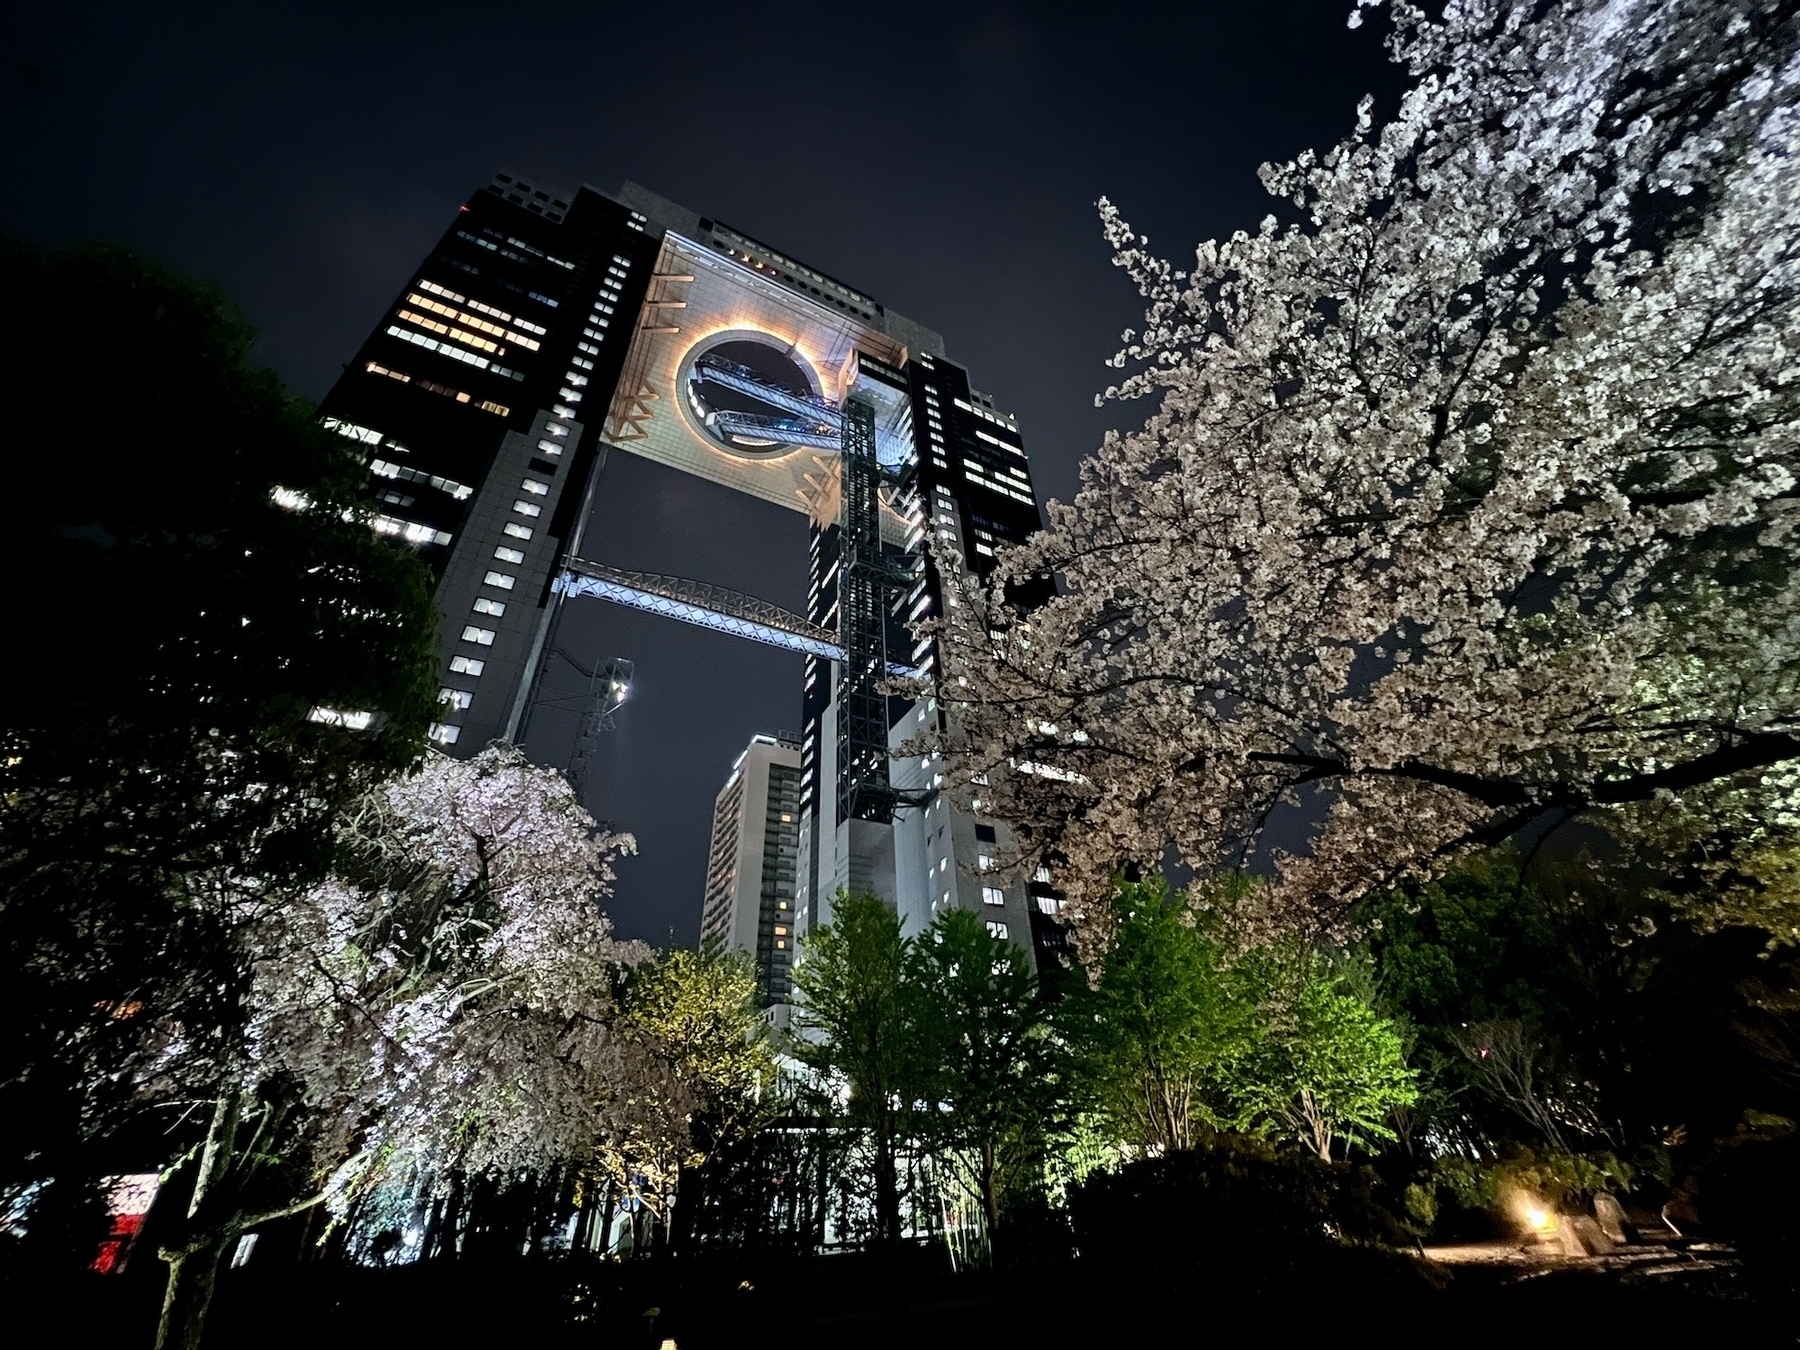 Wide angle of the Umeda Sky Building from the ground. The building is actually two, capped off with a roof with a giant hole in it. Two escalators carry people up and down through the hole to the top floors. Two cherry blossom trees in the foreground.